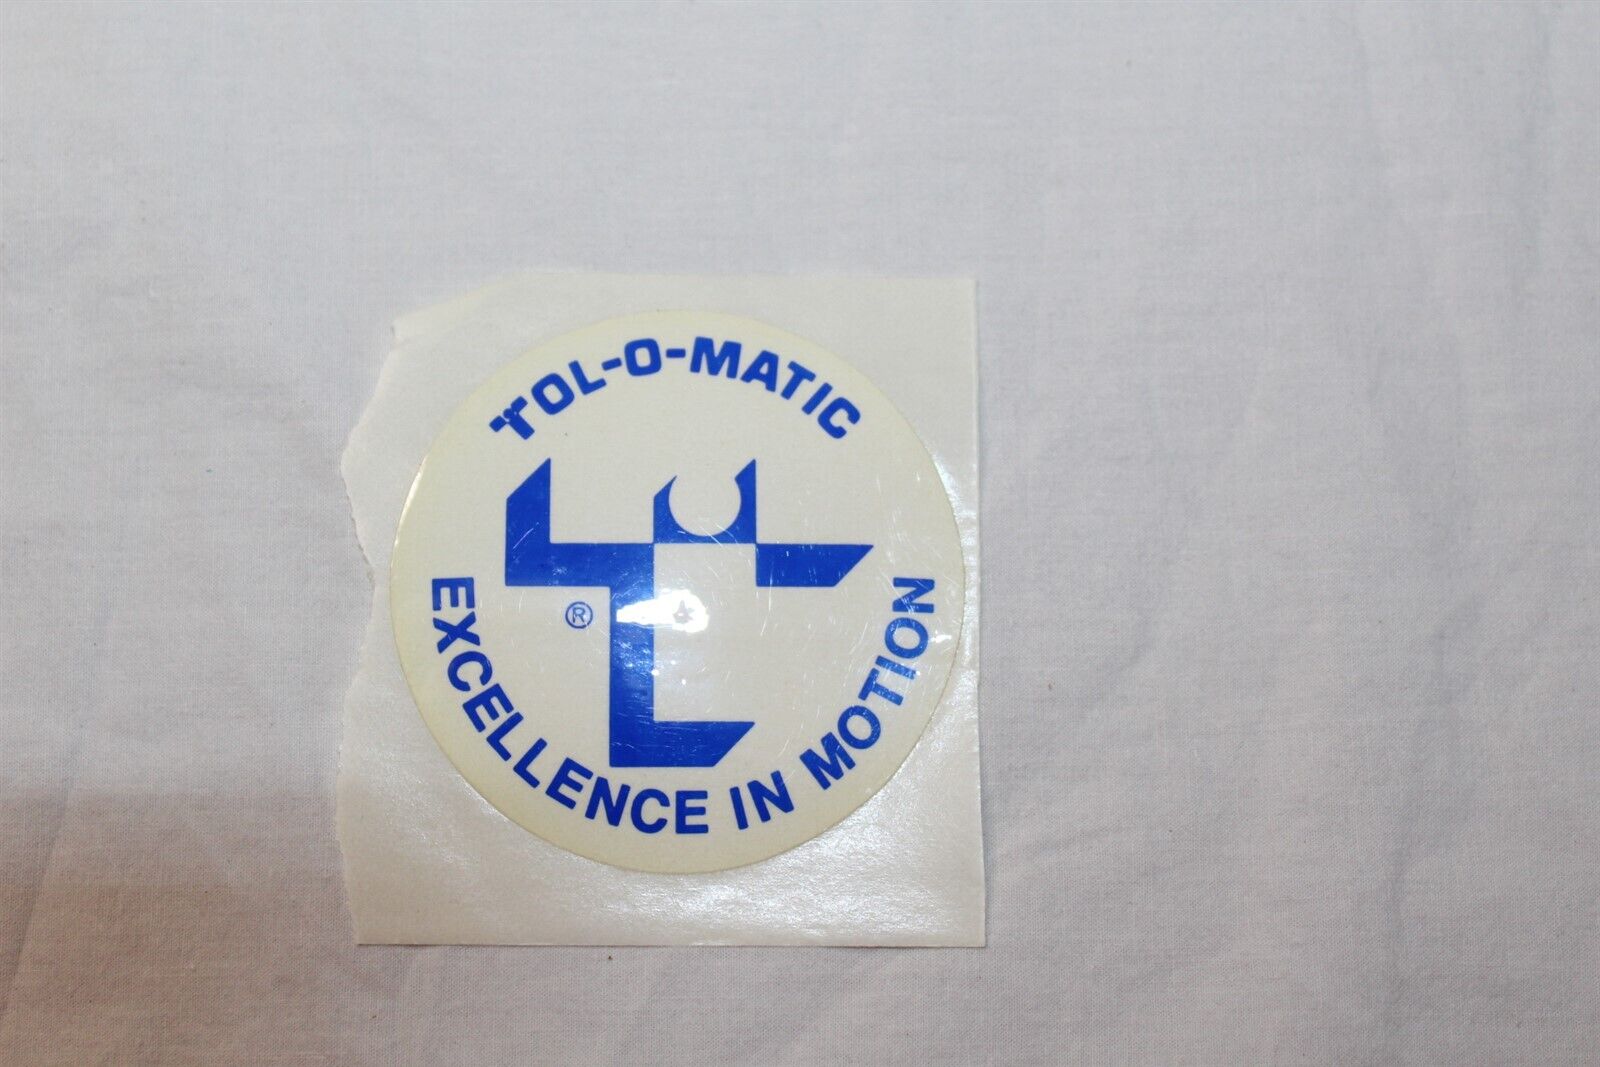 Sticker Label Advertising Tol-O-Matic Excellence Collectible Badge Decal